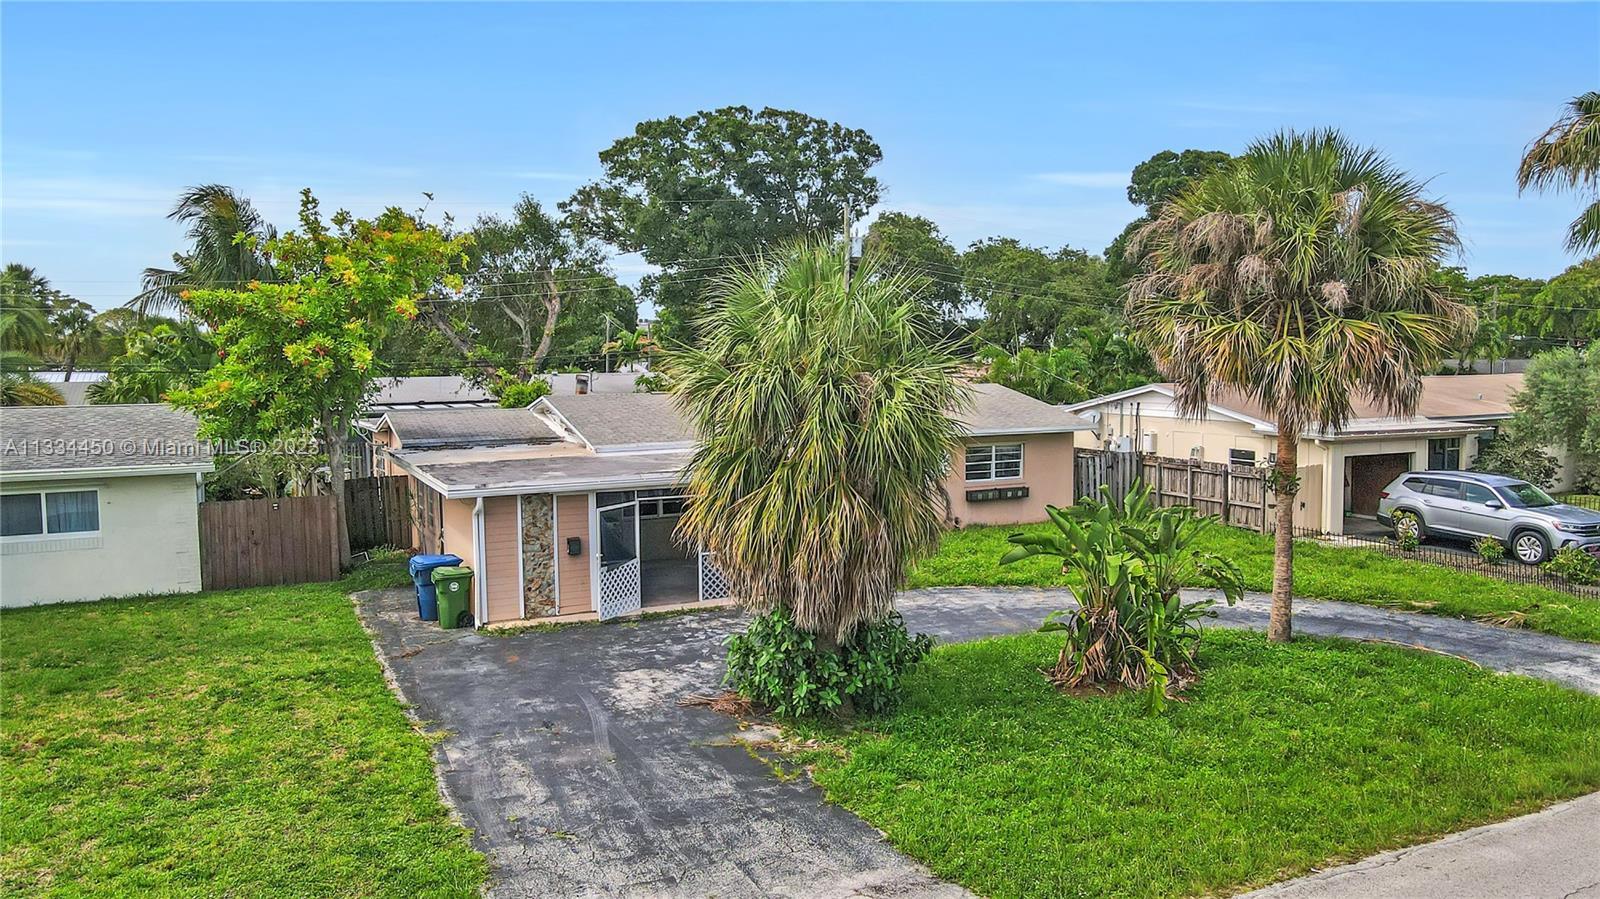 BUILD YOUR DREAM HOME! Located in the highly desirable central Wilton Manors neighborhood of Tropica